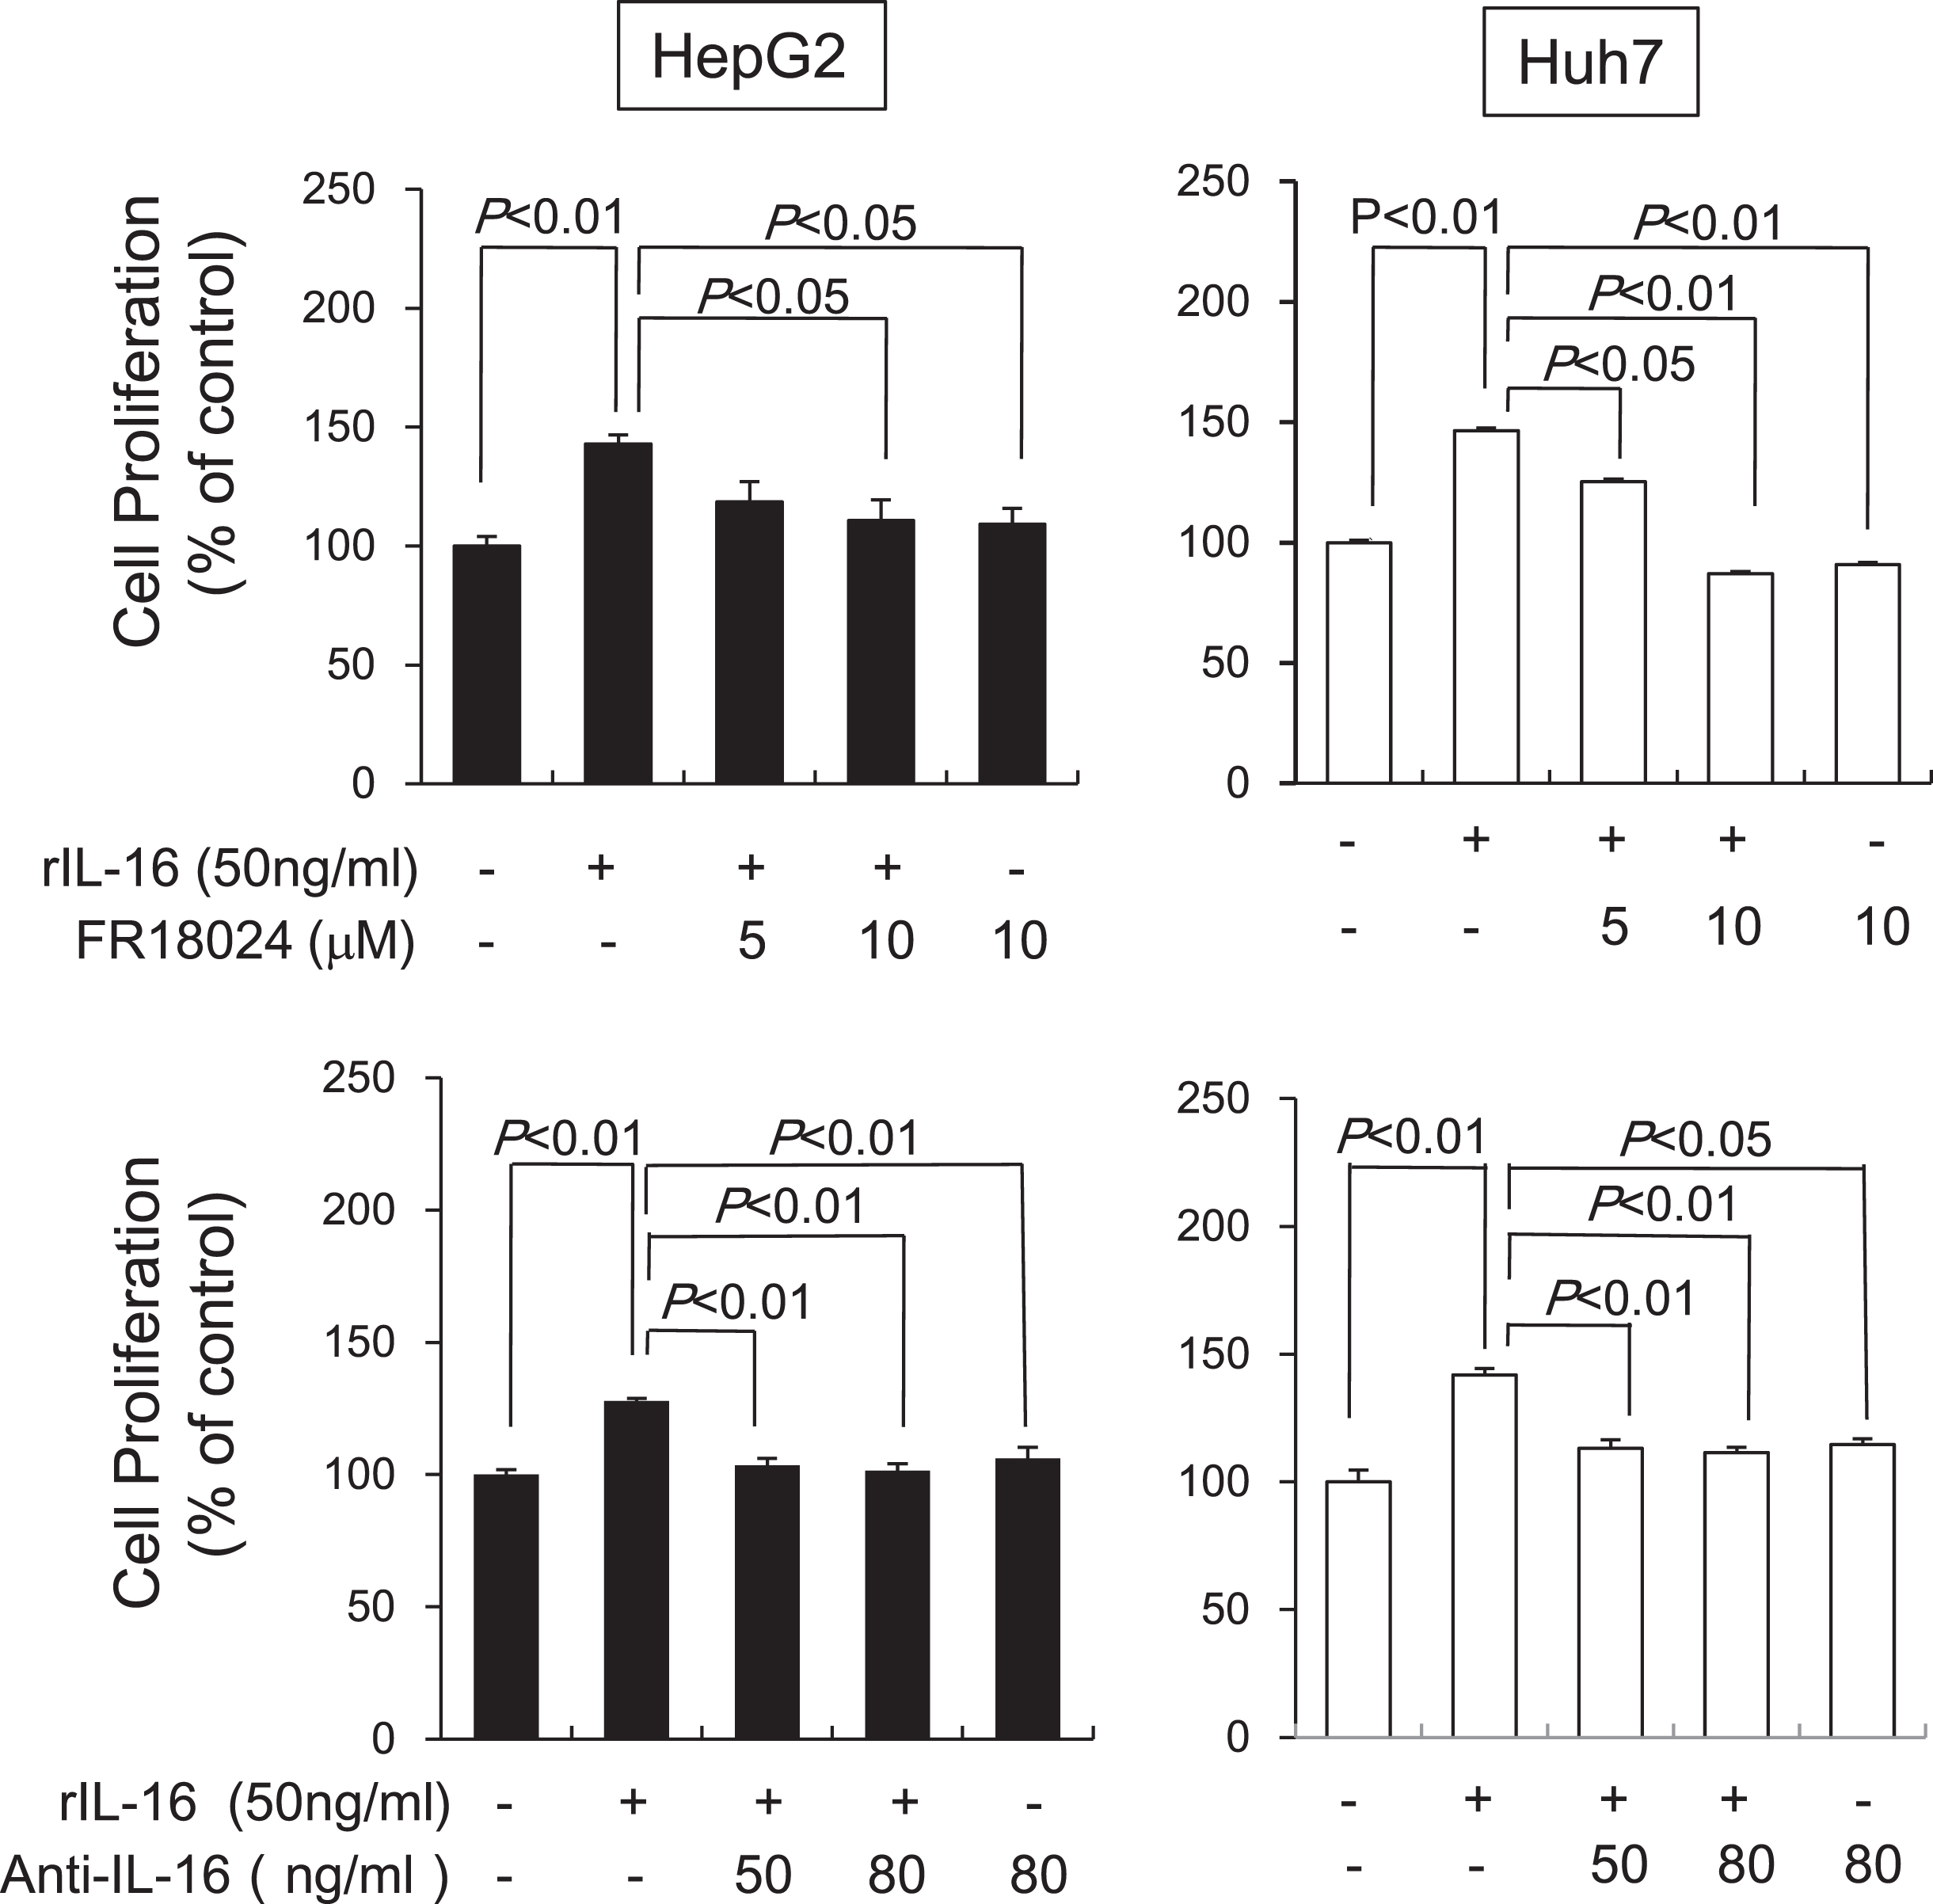 Effects of an ERK inhibitor and anti-IL-16 Ab on IL-16-induced cell proliferation in HCC cell lines analyzed after 48 h by western blotting. HepG2 and Huh7 cells were pretreated with FR18024 (5 or 10μM) or anti-IL-16 Ab (50 or 80 ng/mL) followed by a 48-h incubation with rIL-16. The cell proliferation rate was measured by MTS assay. Data indicate the mean±SEM. All data are representative of eight independent experiments. The addition of FR18024 or anti-IL-16 Ab alone did not affect cell proliferation.